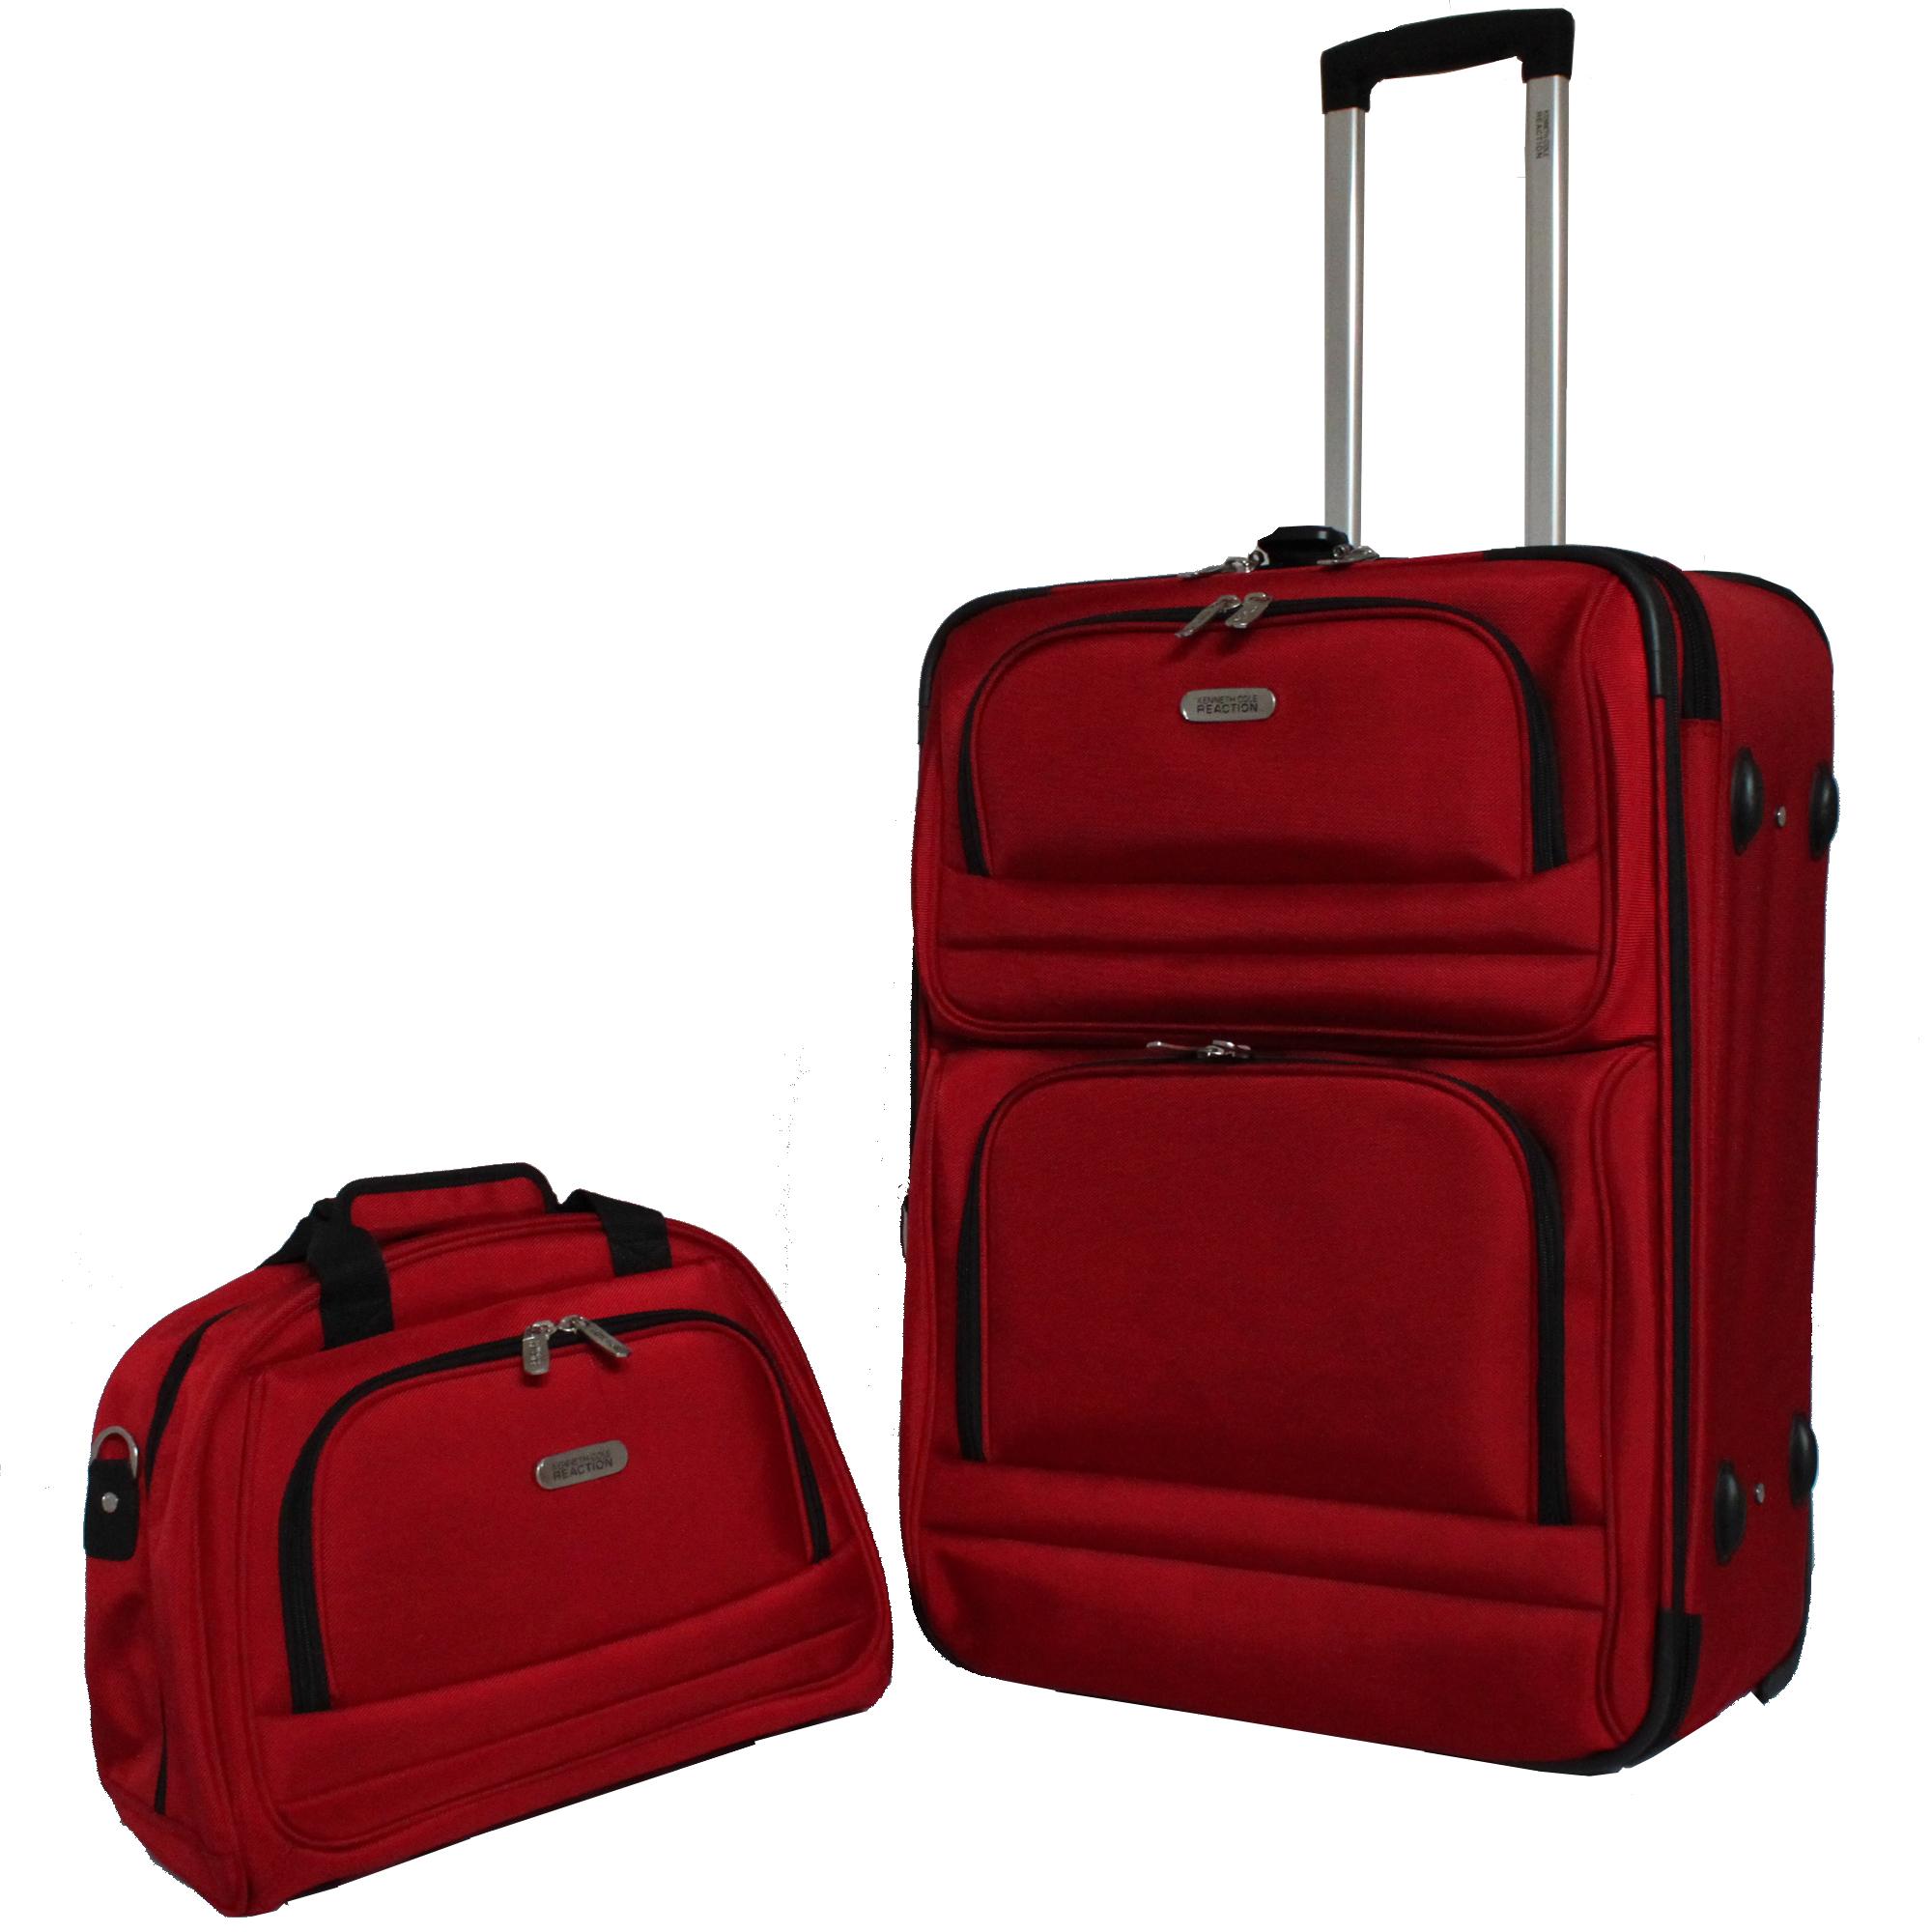 Kenneth Cole Higher Limits 2 piece Luggage Set